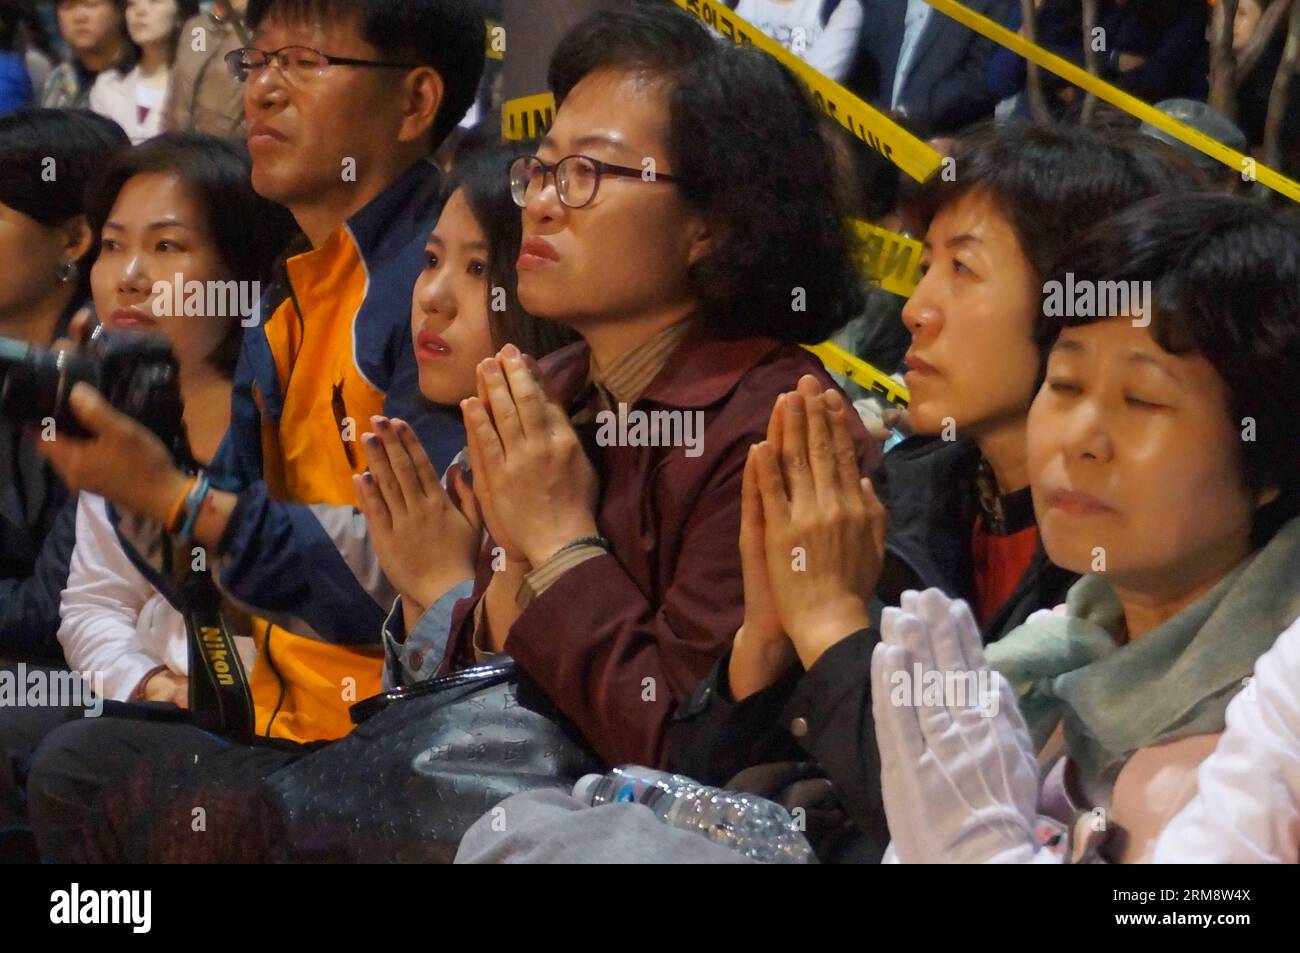 (140427) -- SEOUL, April 26, 2014 (Xinhua) -- People pray for the deceased and missing passengers of the capsized ship Sewol during the Lotus Lantern Festival for upcoming birthday of Buddha in Seoul, South Korea, April 26, 2014. (Xinhua/Du Baiyu) (dzl) SOUTH KOREA-SEOUL-SEWOL-PRAY PUBLICATIONxNOTxINxCHN   Seoul April 26 2014 XINHUA Celebrities Pray for The deceased and Missing Passengers of The capsized Ship  during The Lotus Lantern Festival for upcoming Birthday of Buddha in Seoul South Korea April 26 2014 XINHUA you Baiyu dzl South Korea Seoul  Pray PUBLICATIONxNOTxINxCHN Stock Photo